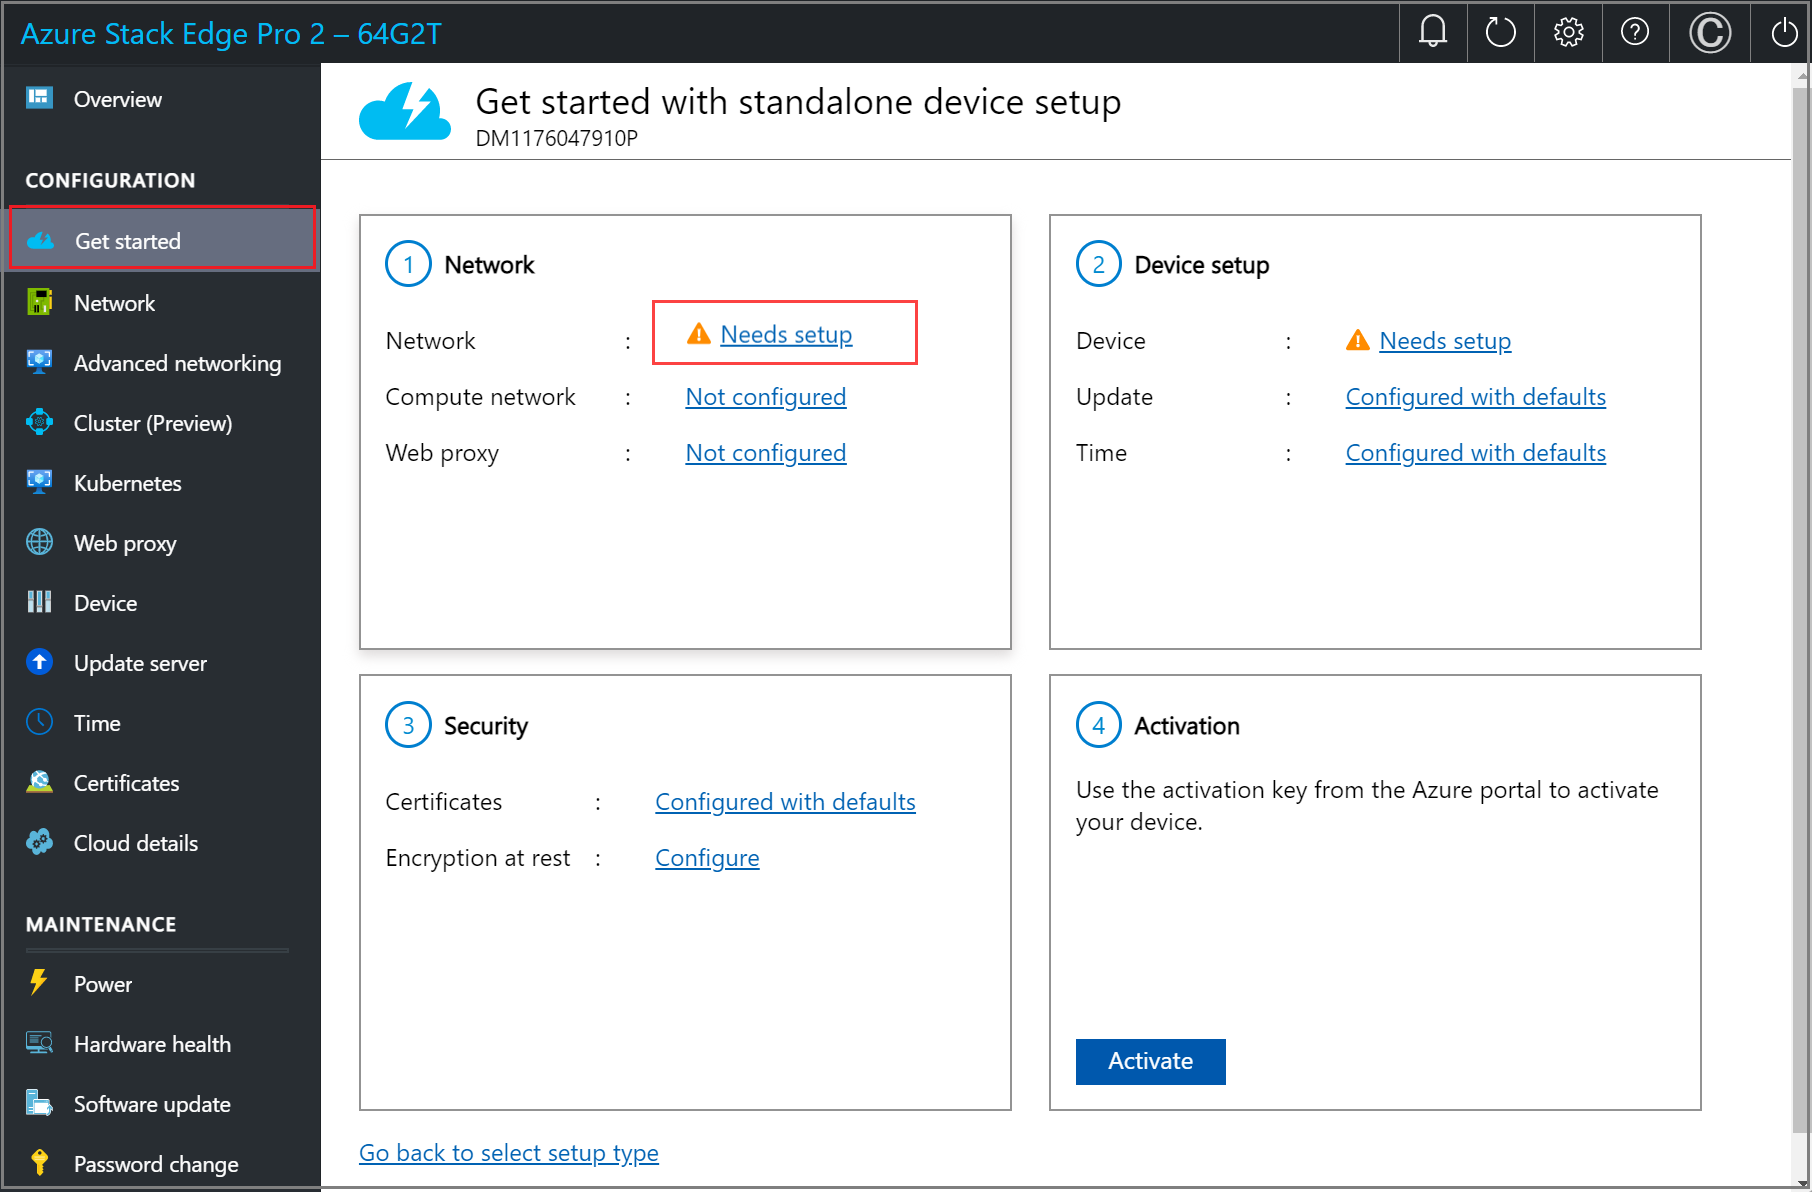 Screenshot of the Get started page in the local web UI of an Azure Stack Edge device. The Needs setup is highlighted on the Network tile.